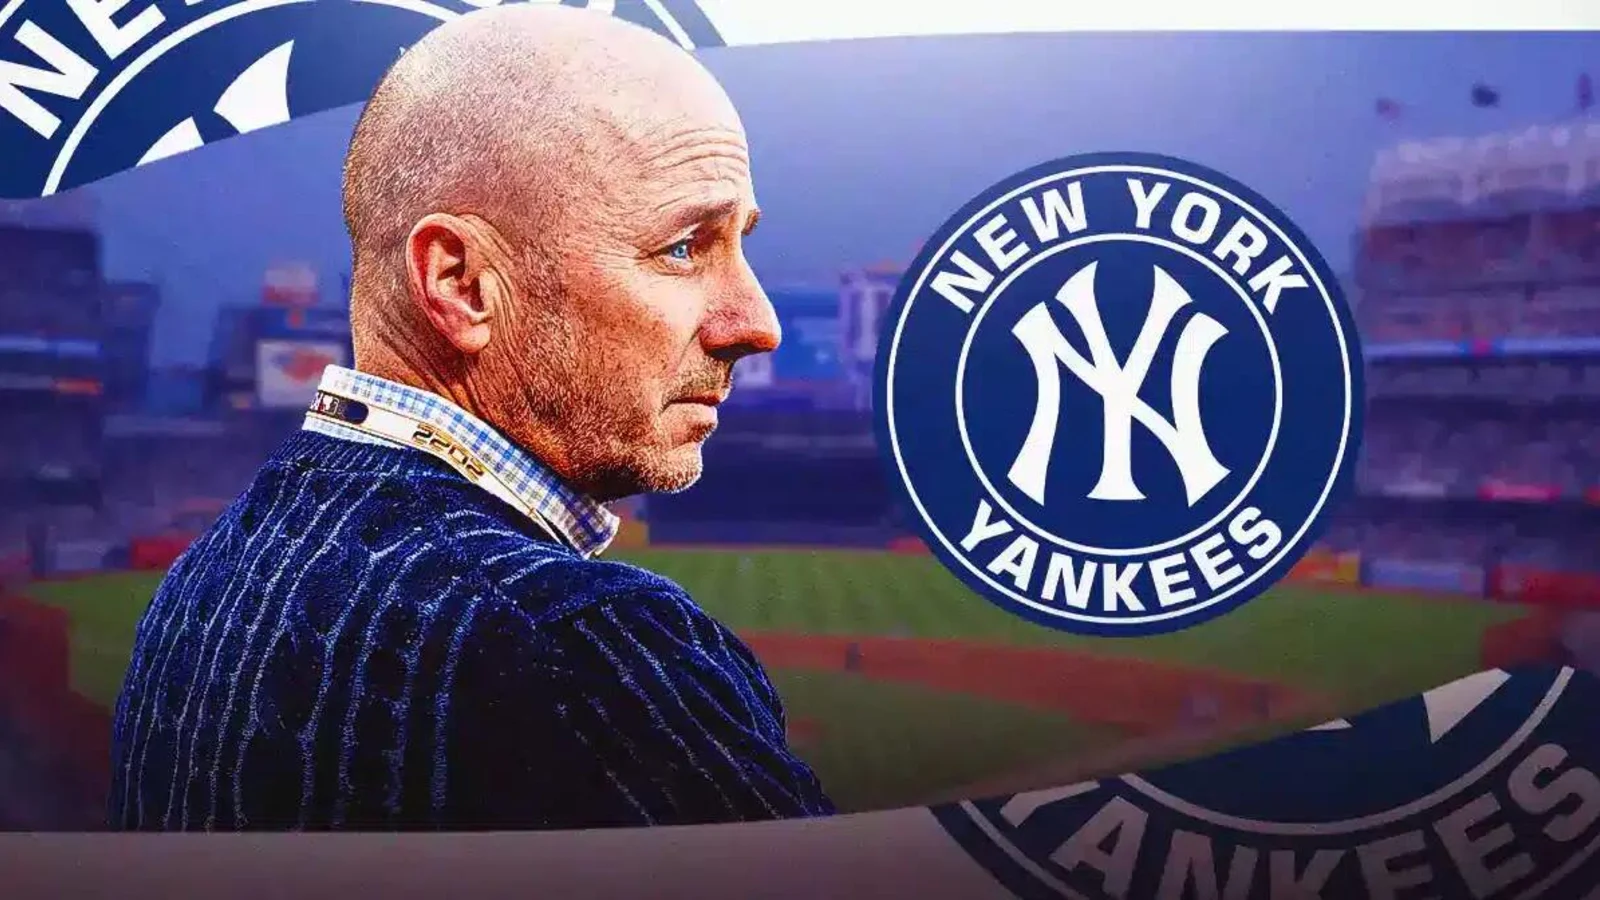 Brian Cashman’s message to Yankees fans after rough 2023 season